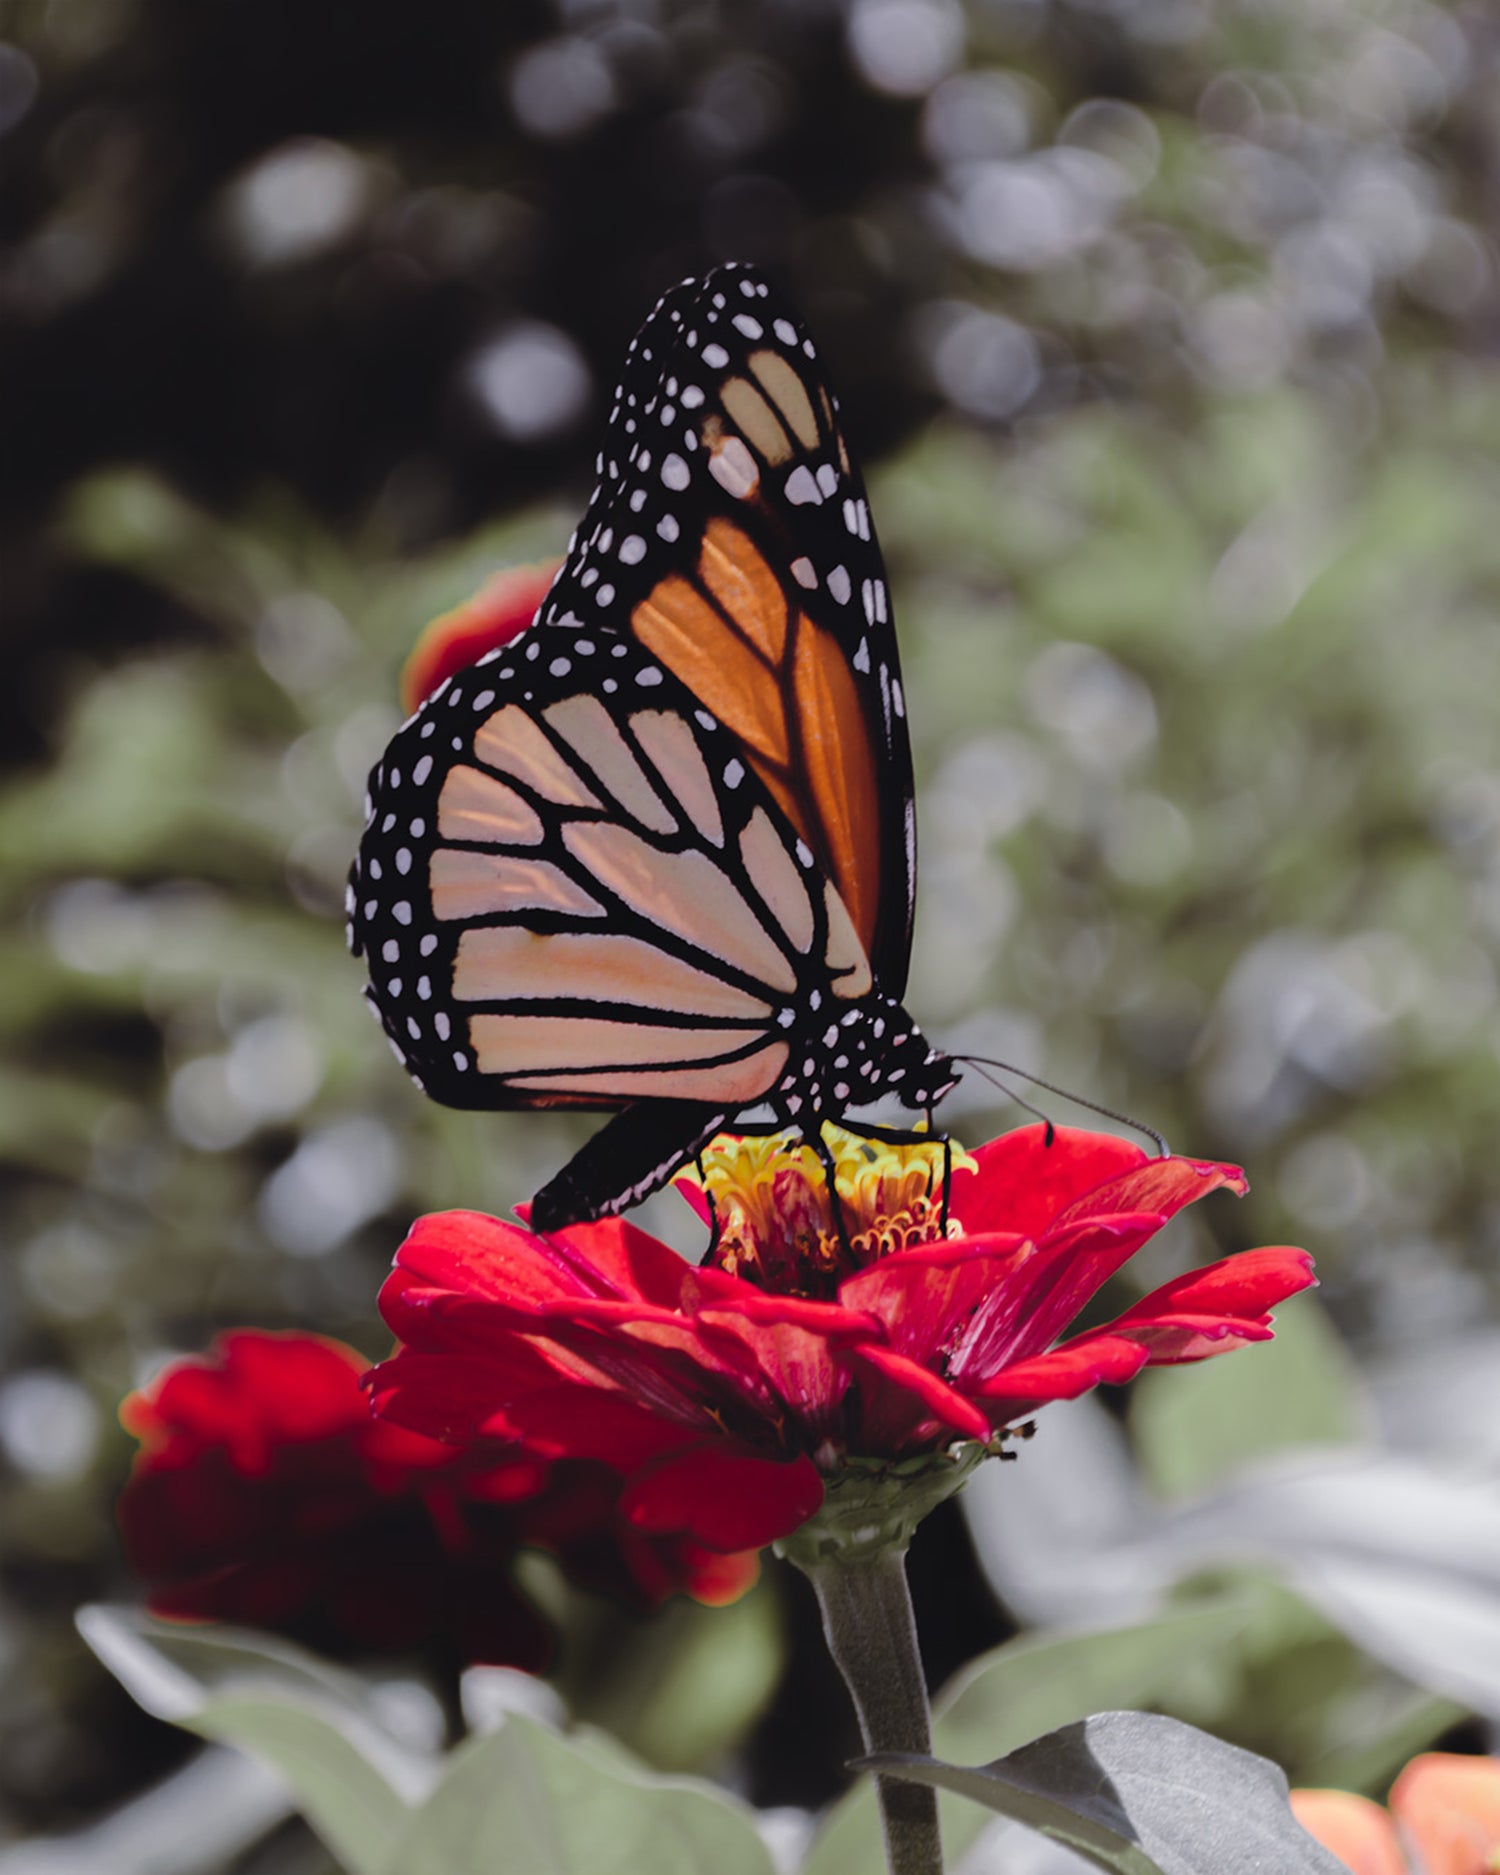 Butterfly on red flower in a field. JAMILLIAH'S WISDOM IS TIMELESS SHOP offers an array of amazing and practical products including designer apparel, accessories, and home décor, with timeless wisdom and spiritual awakening / spiritual enlightenment theme